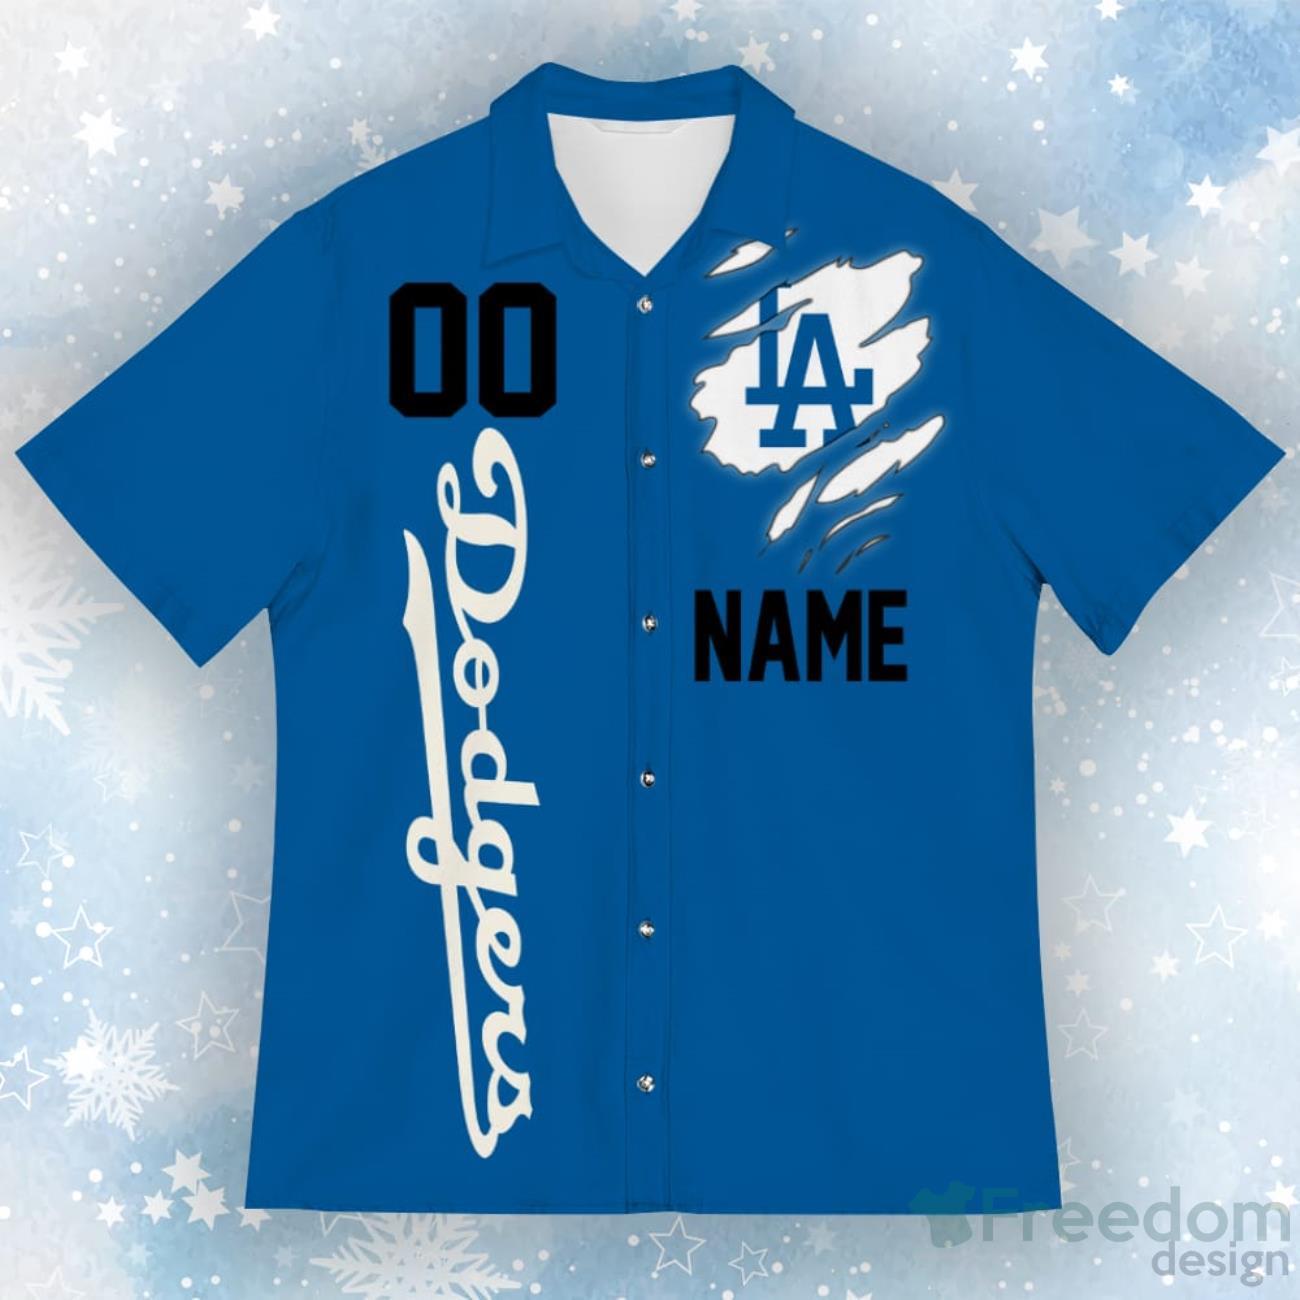 dodgers numbers font